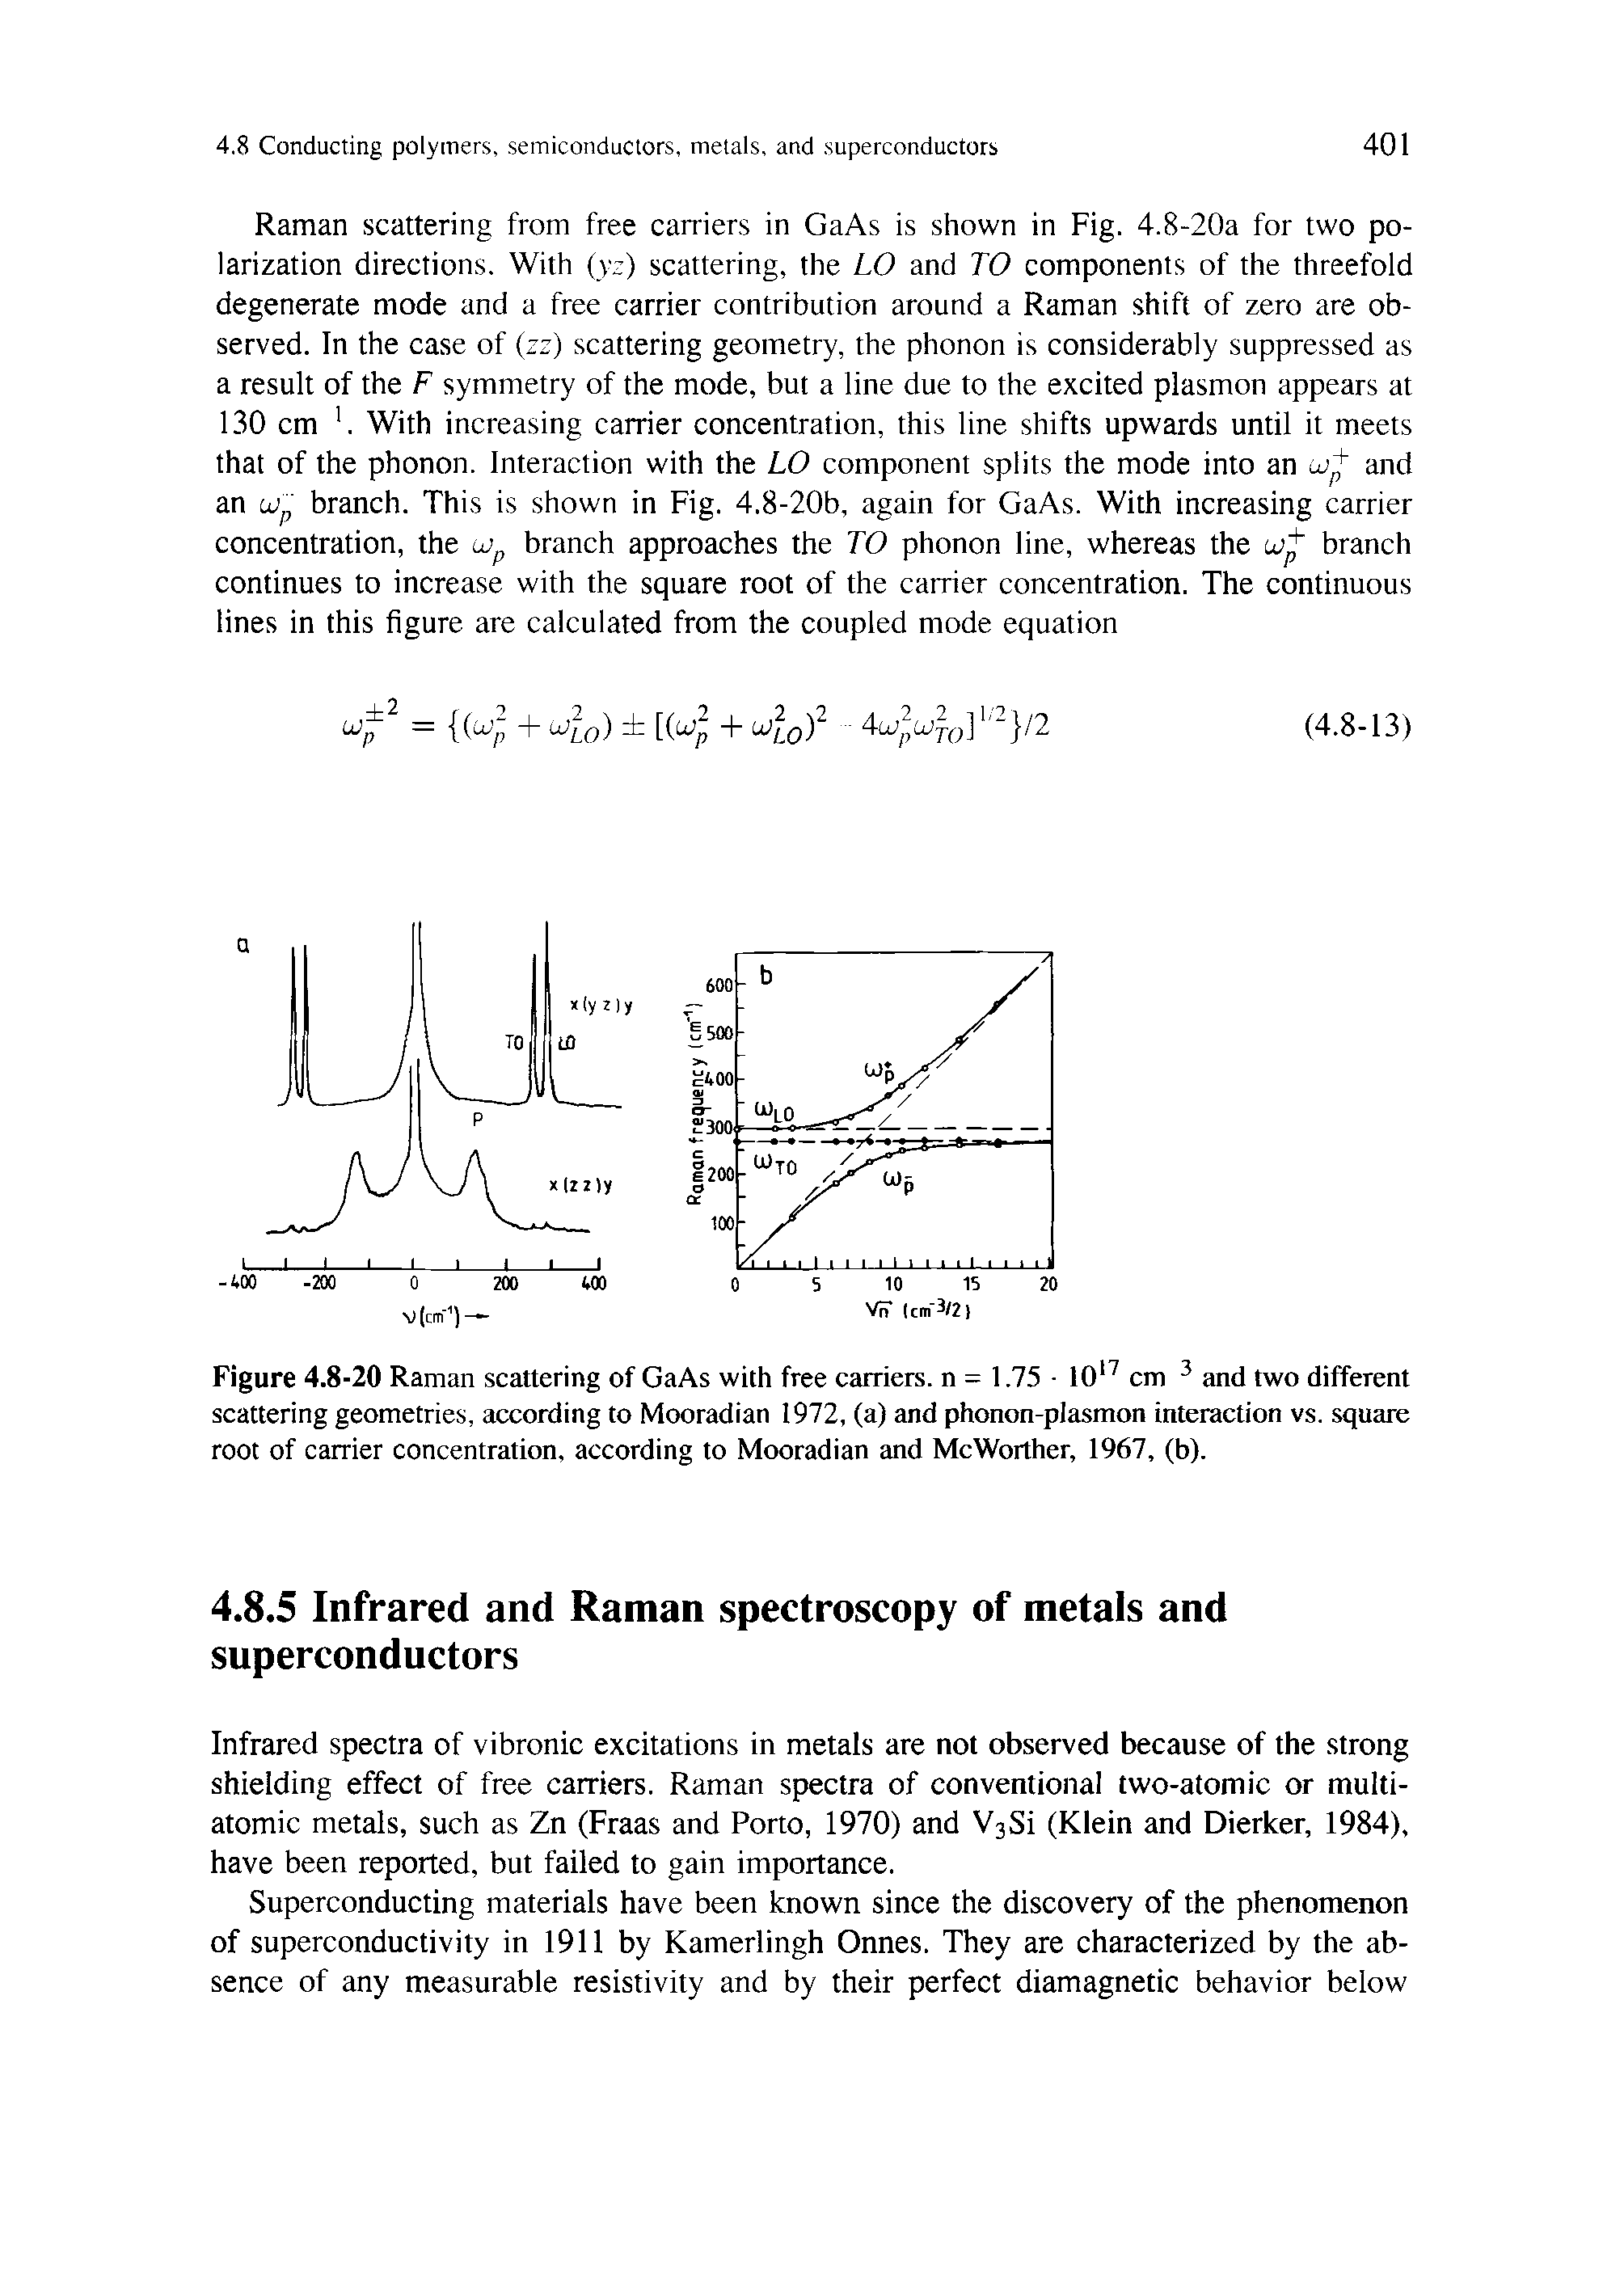 Figure 4.8-20 Raman scattering of GaAs with free carriers, n = 1.75 lO cm and two different scattering geometries, according to Mooradian 1972, (a) and phonon-plasmon interaction vs. square root of carrier concentration, according to Mooradian and McWorther, 1967, (b).